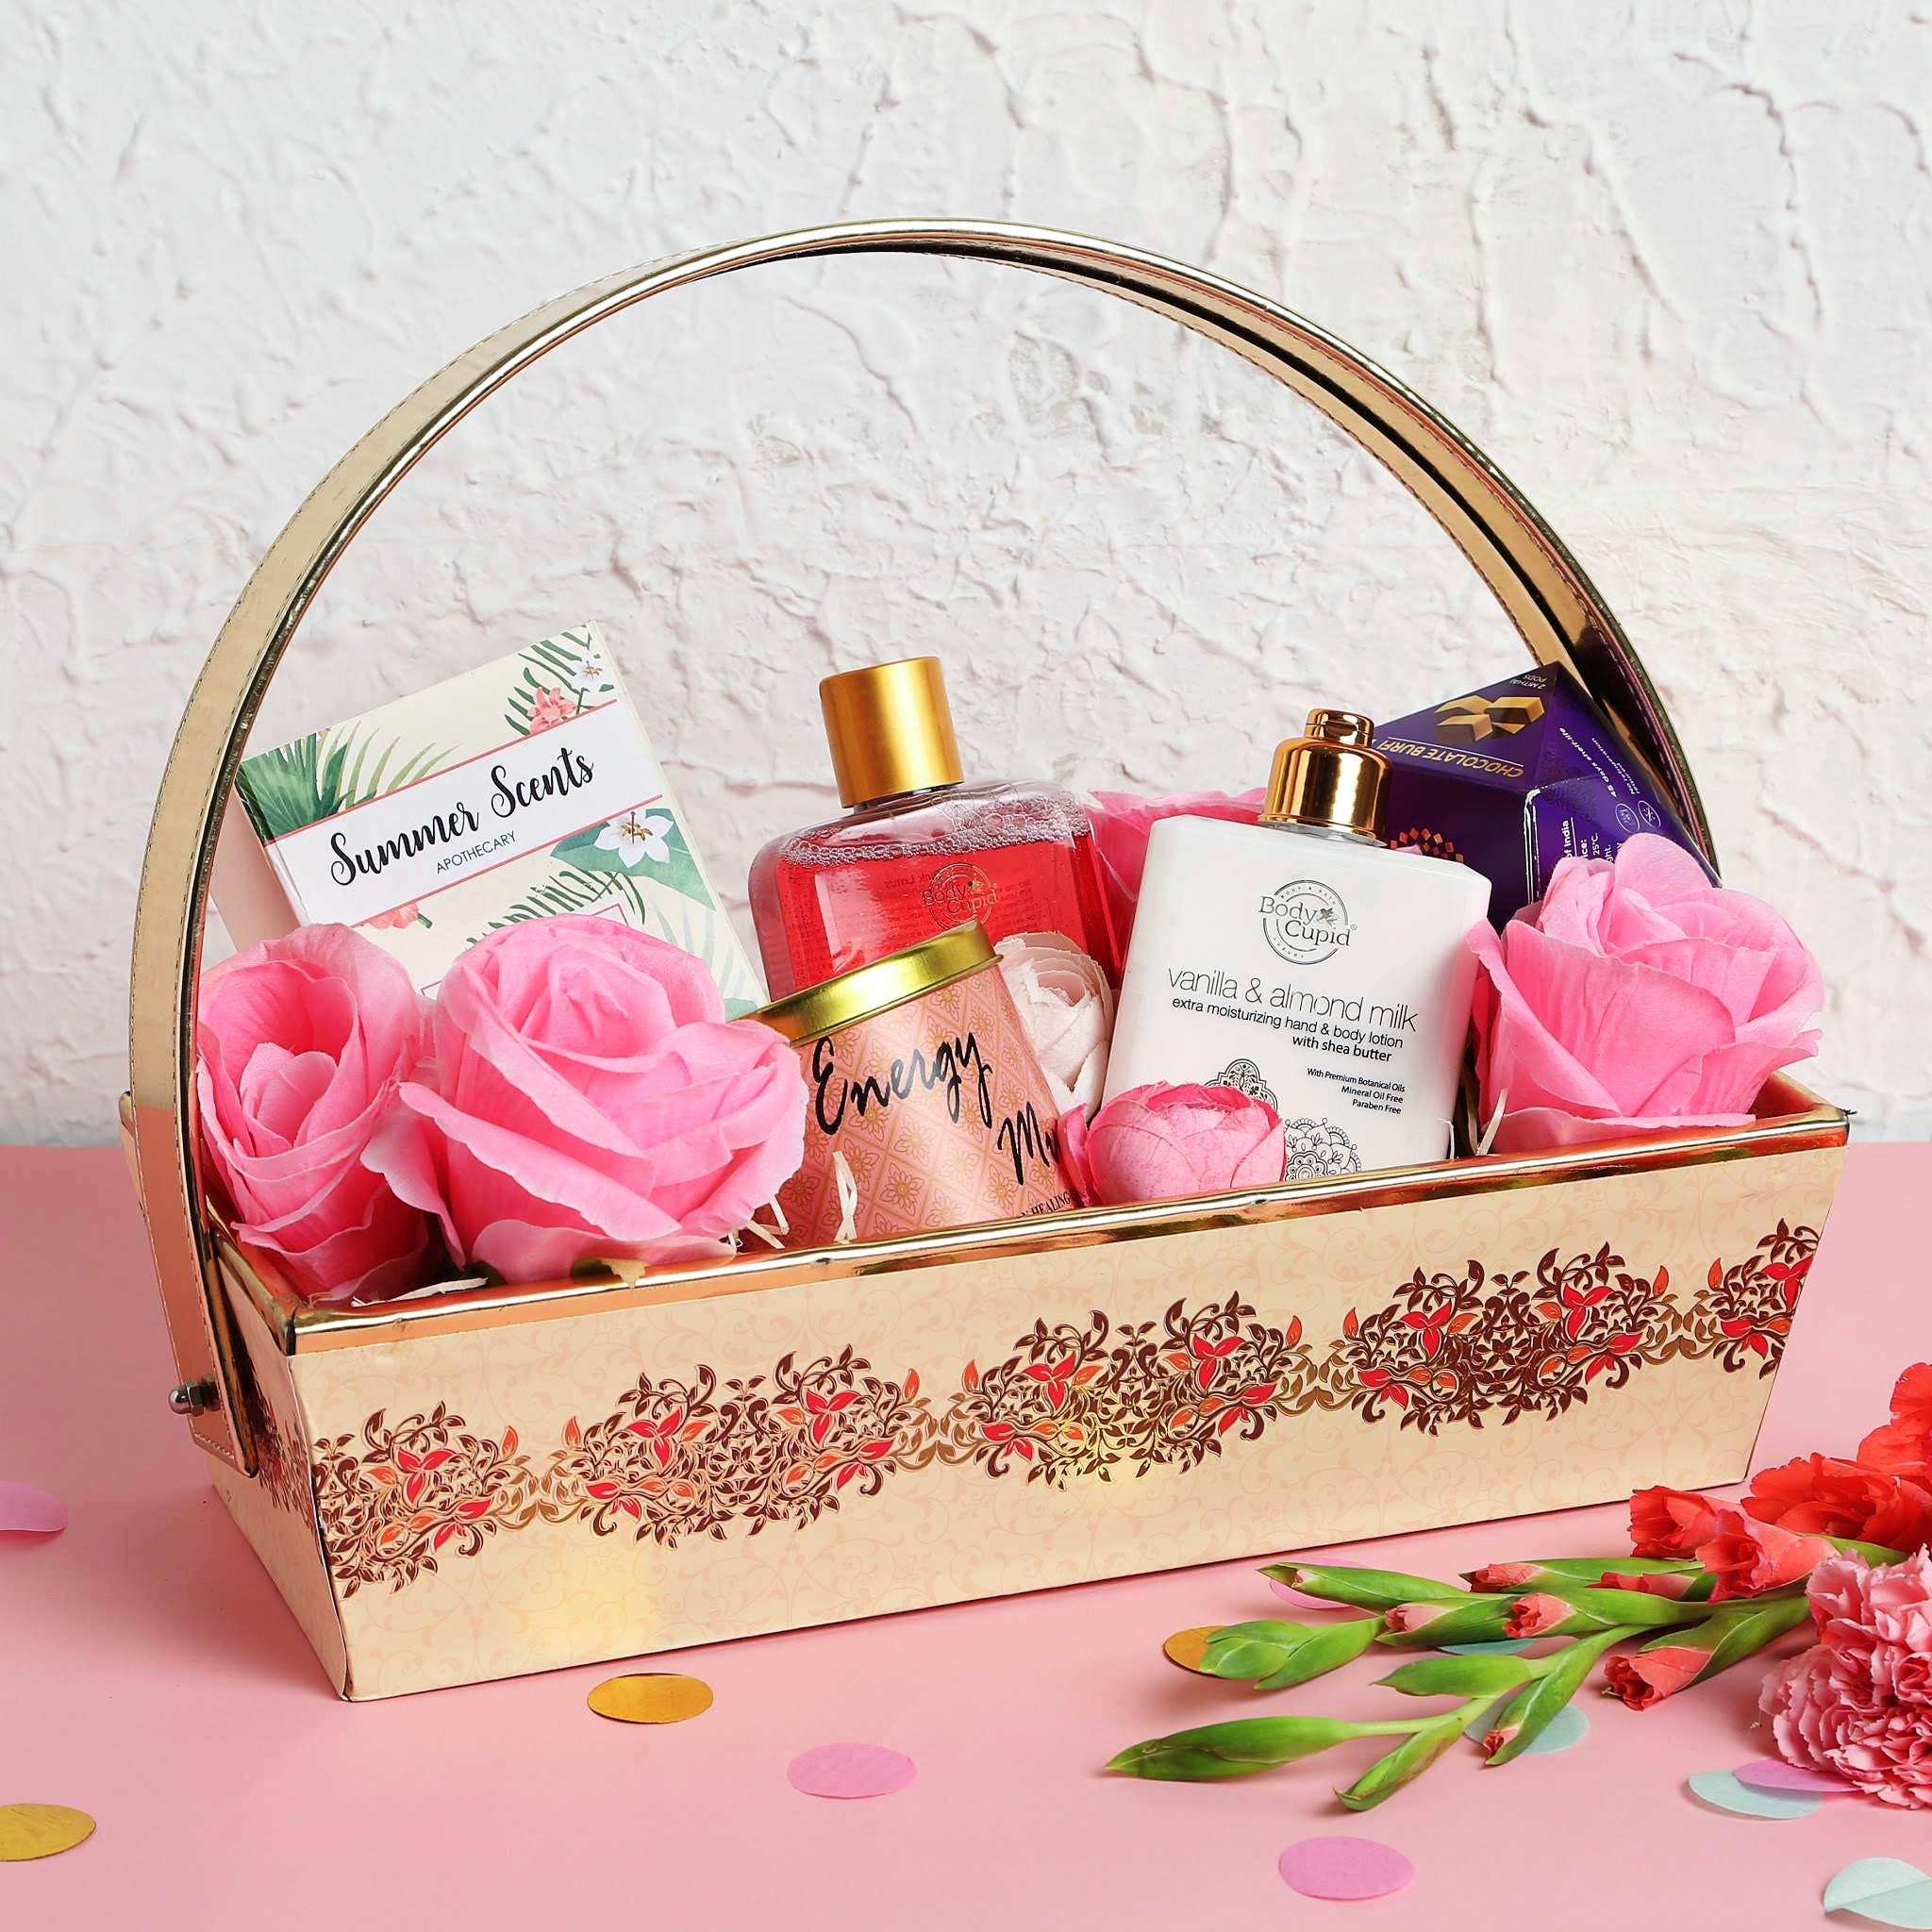 Best beauty hampers | 10 best pampering hampers for gifting now